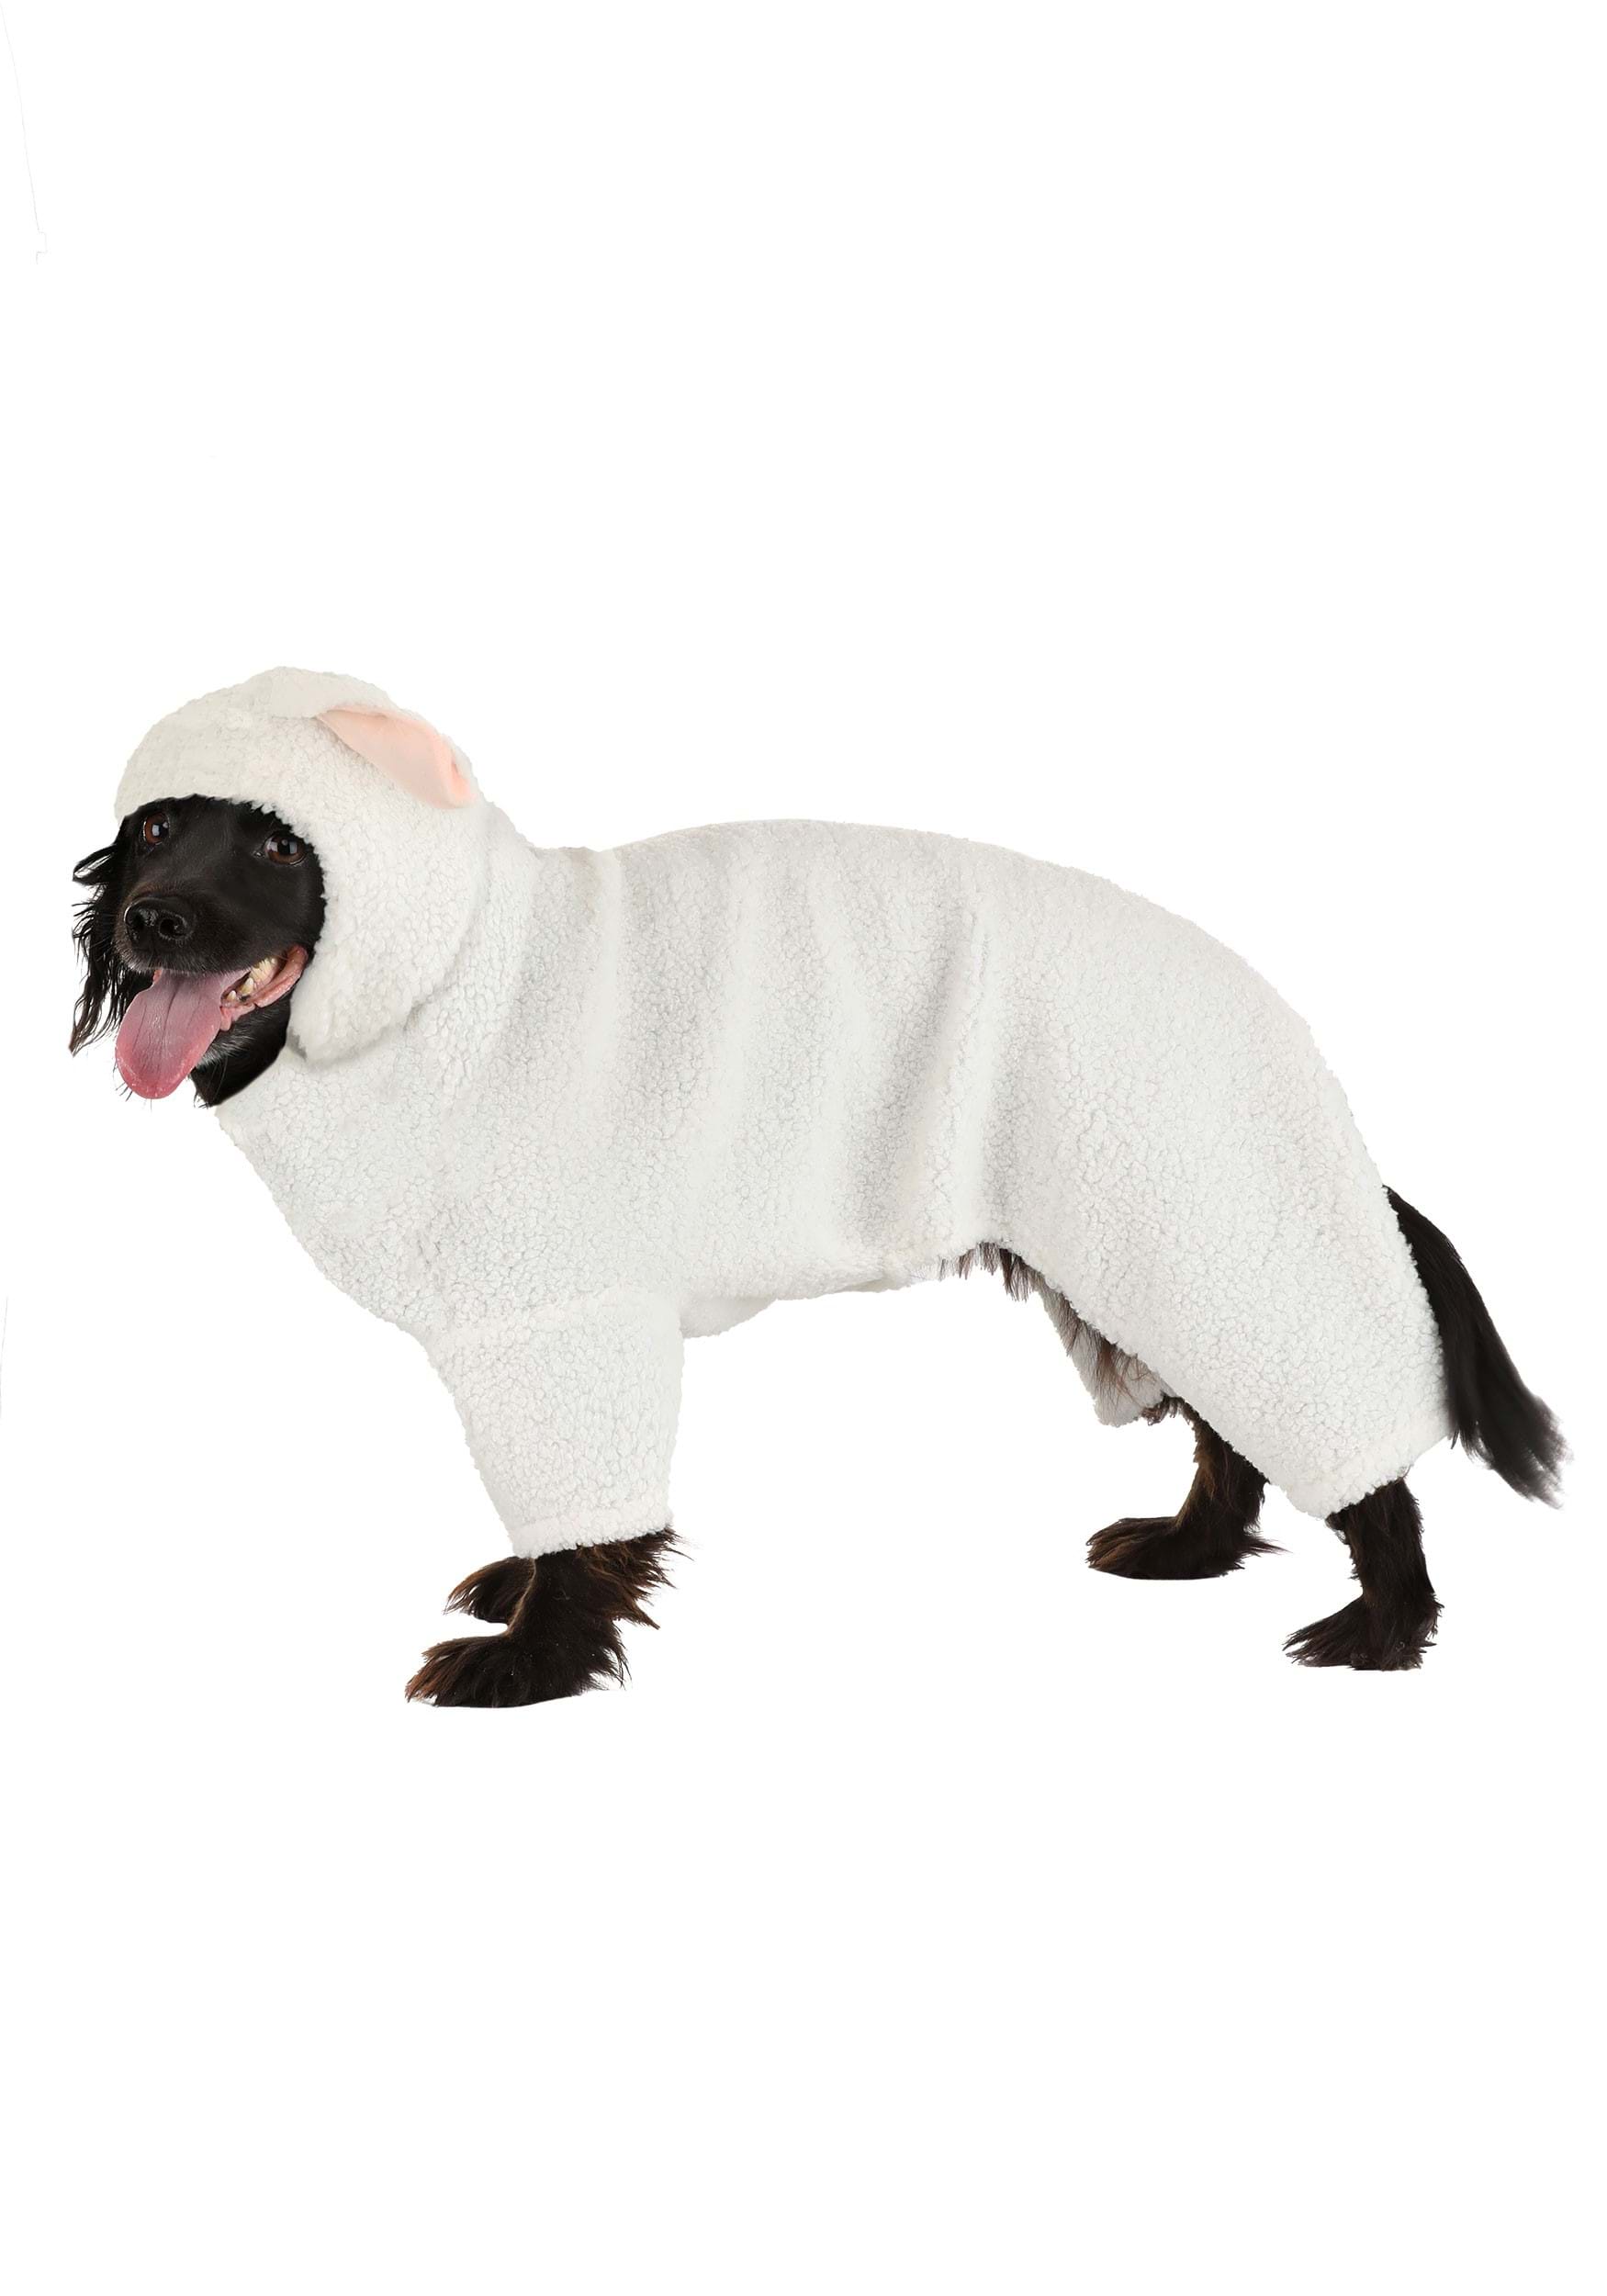 Sheep Pet Fancy Dress Costume For Dogs And Cats